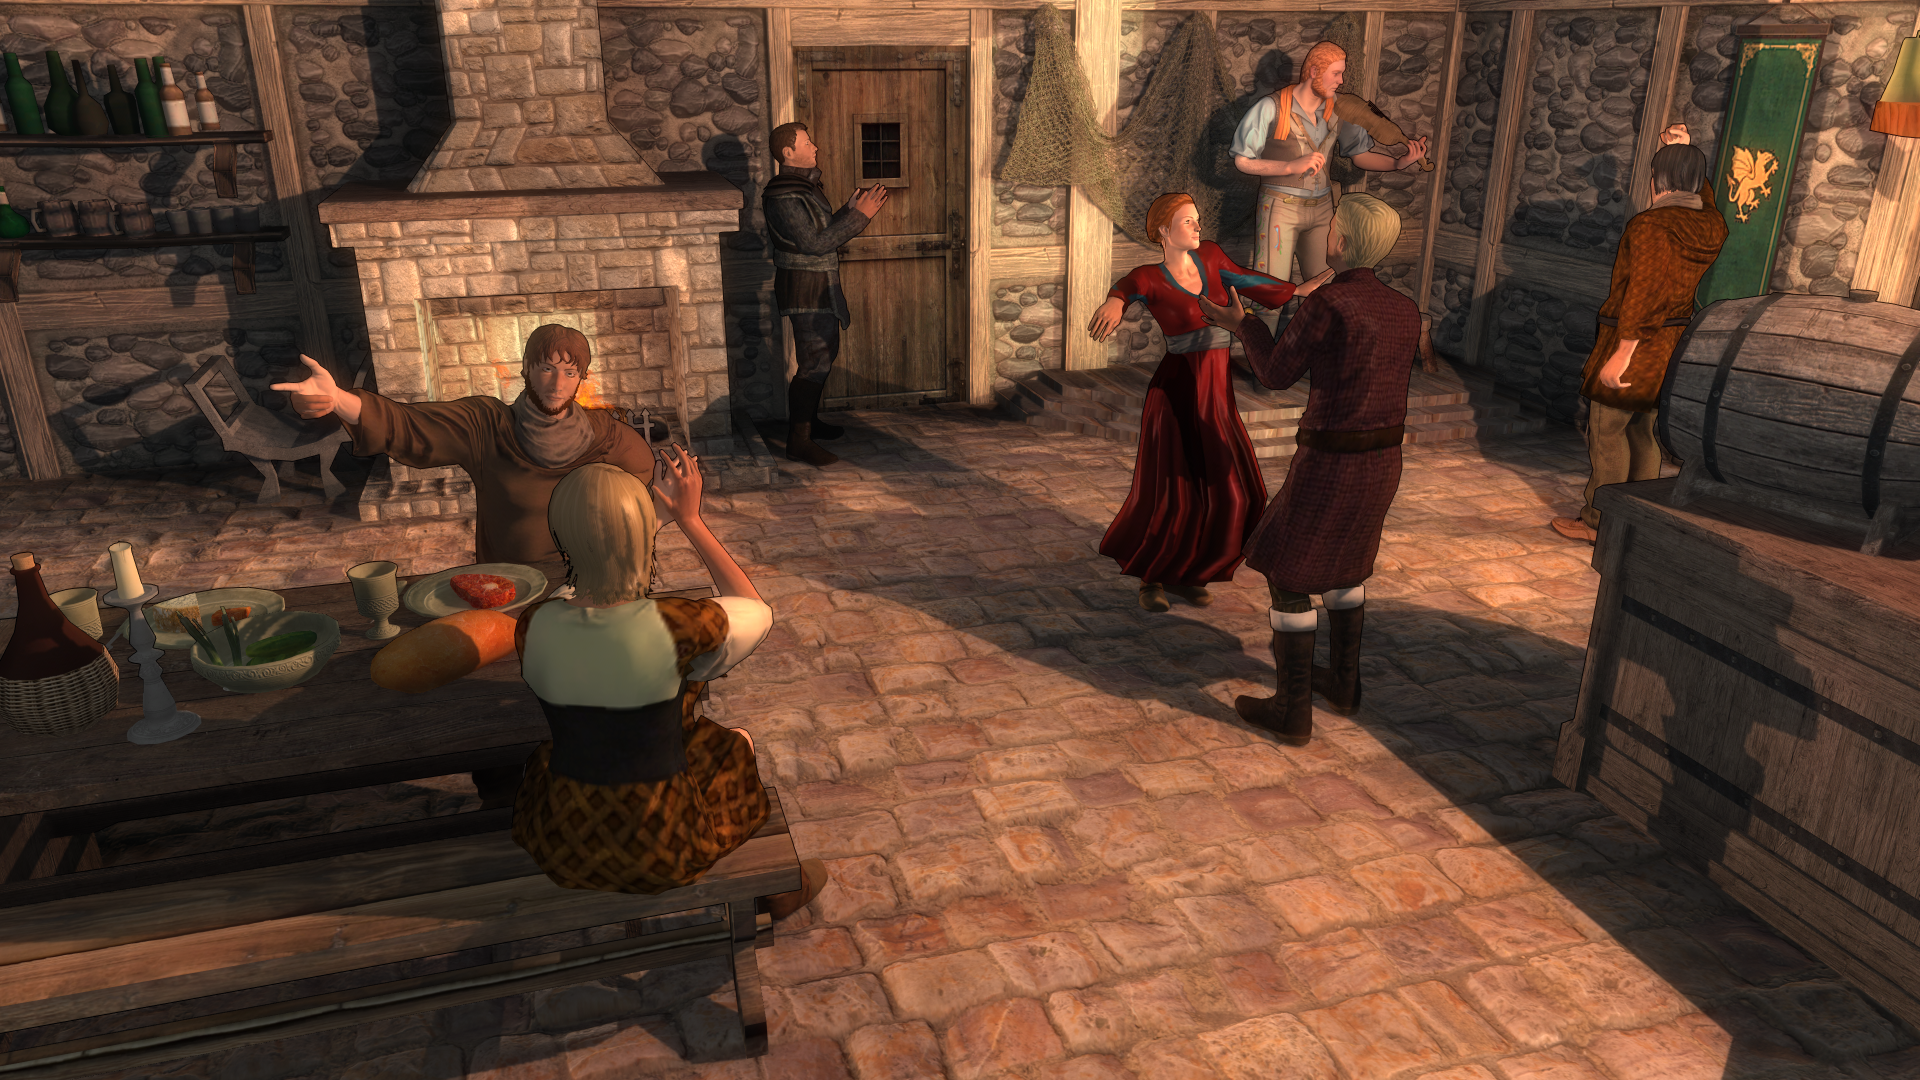 Dancing in the tavern